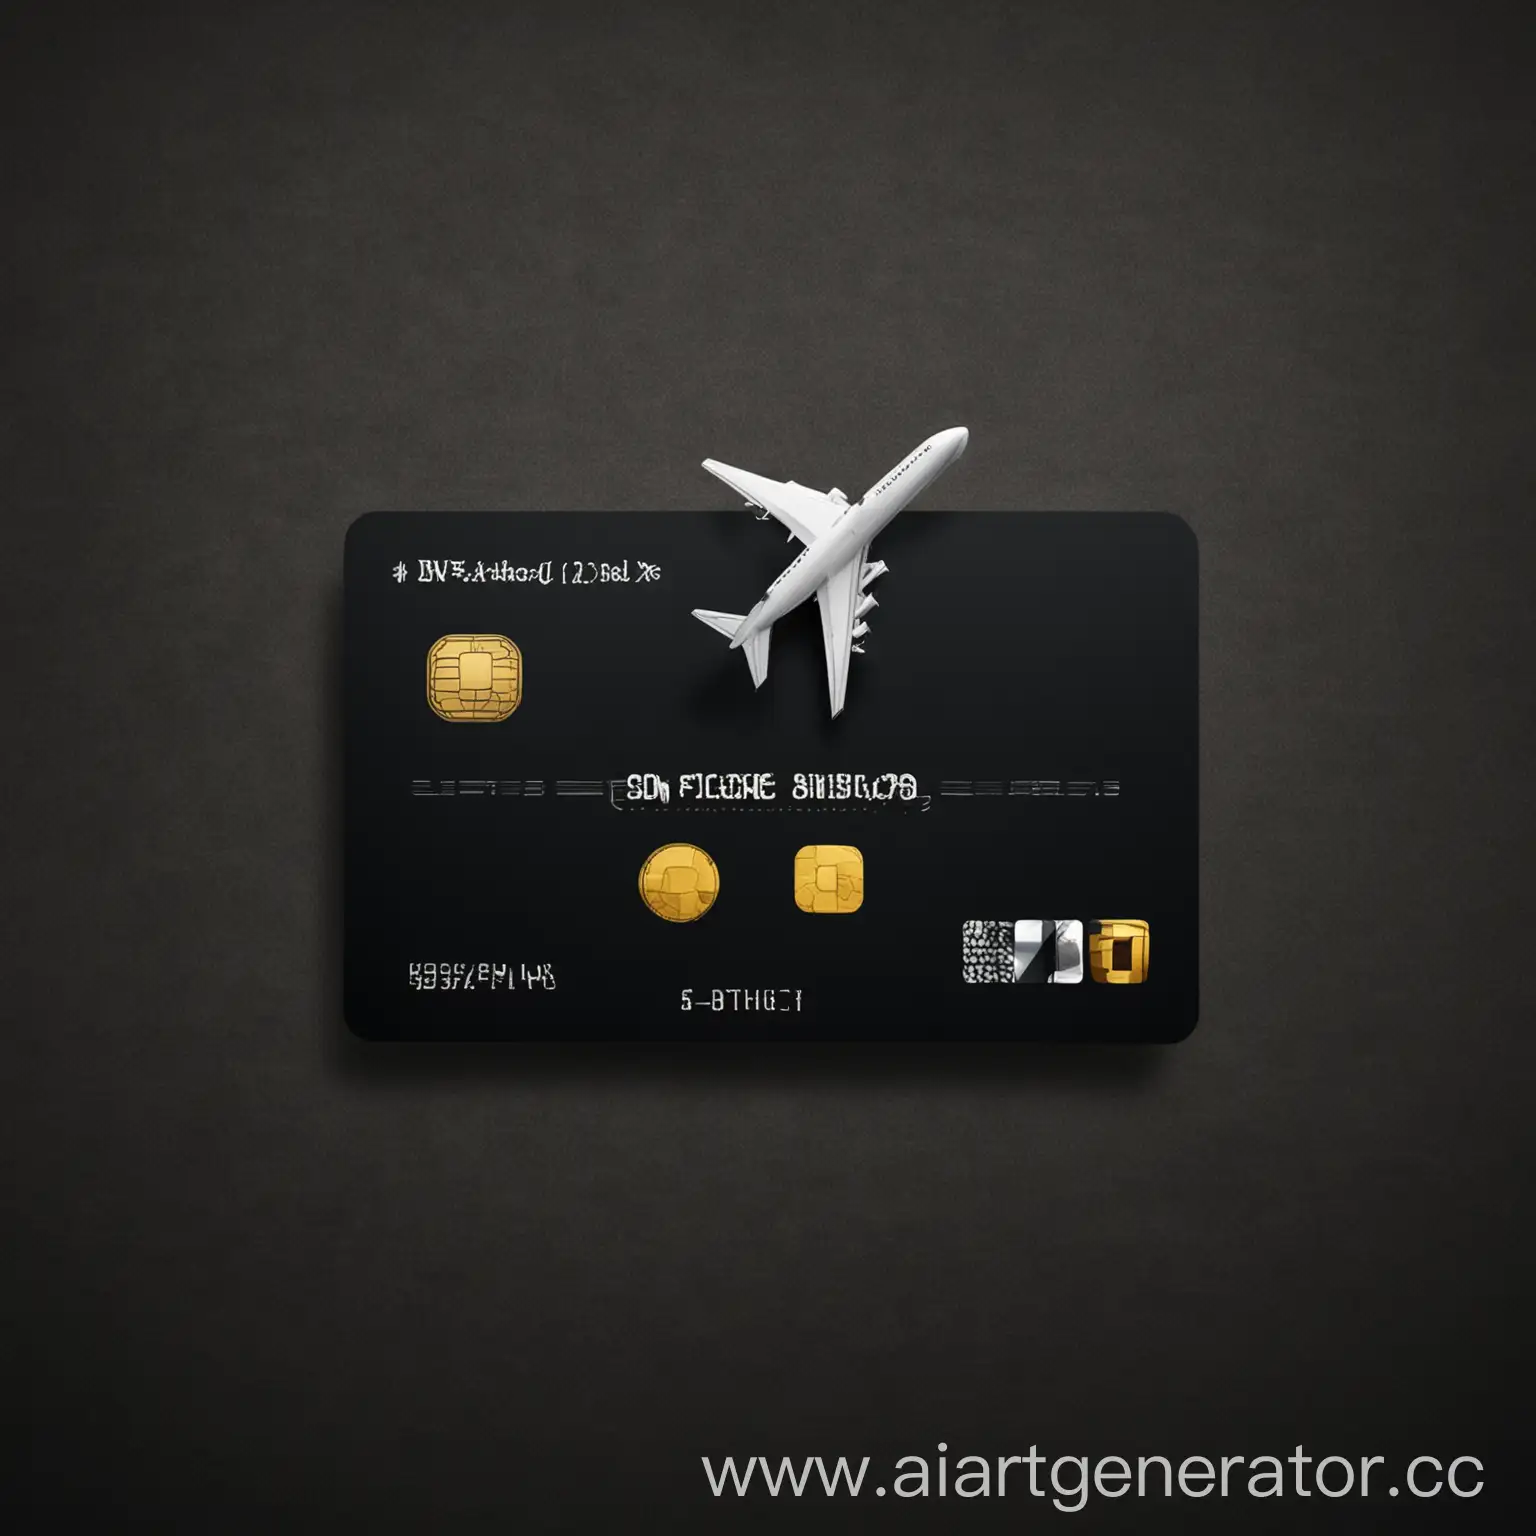 Airplane-on-Bank-Cards-with-Dark-Background